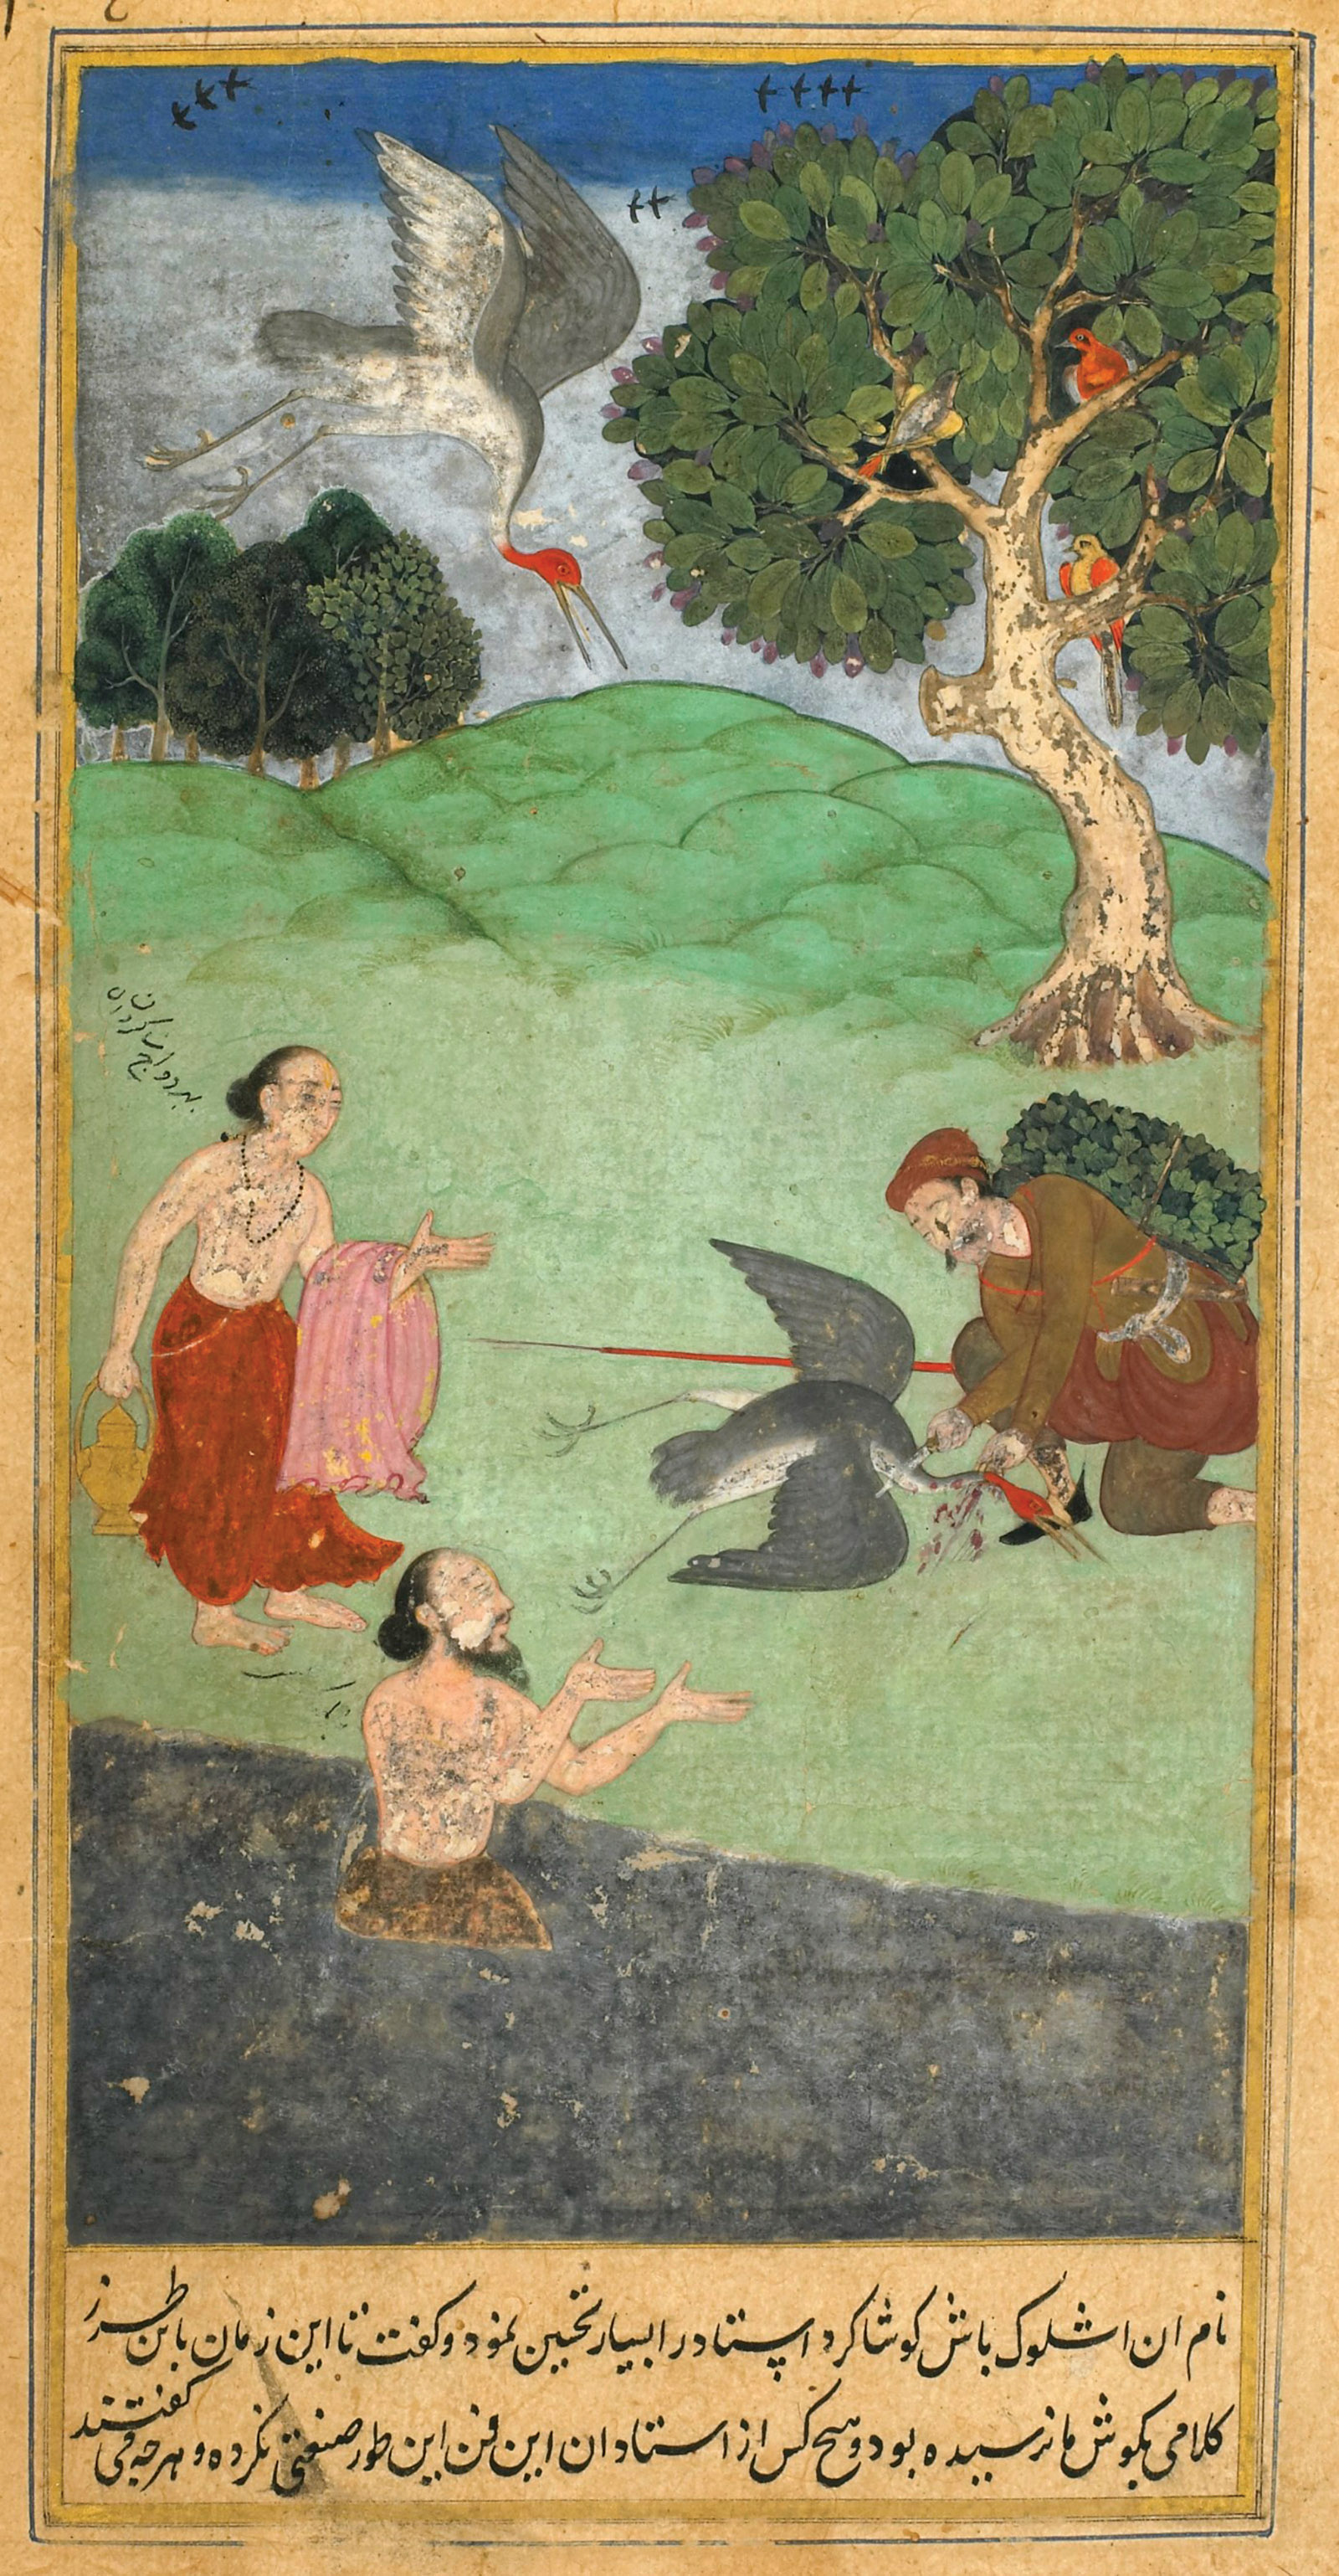 The poet Valmiki seeing a hunter kill a waterbird in the act of mating; illustration from the Ramayana